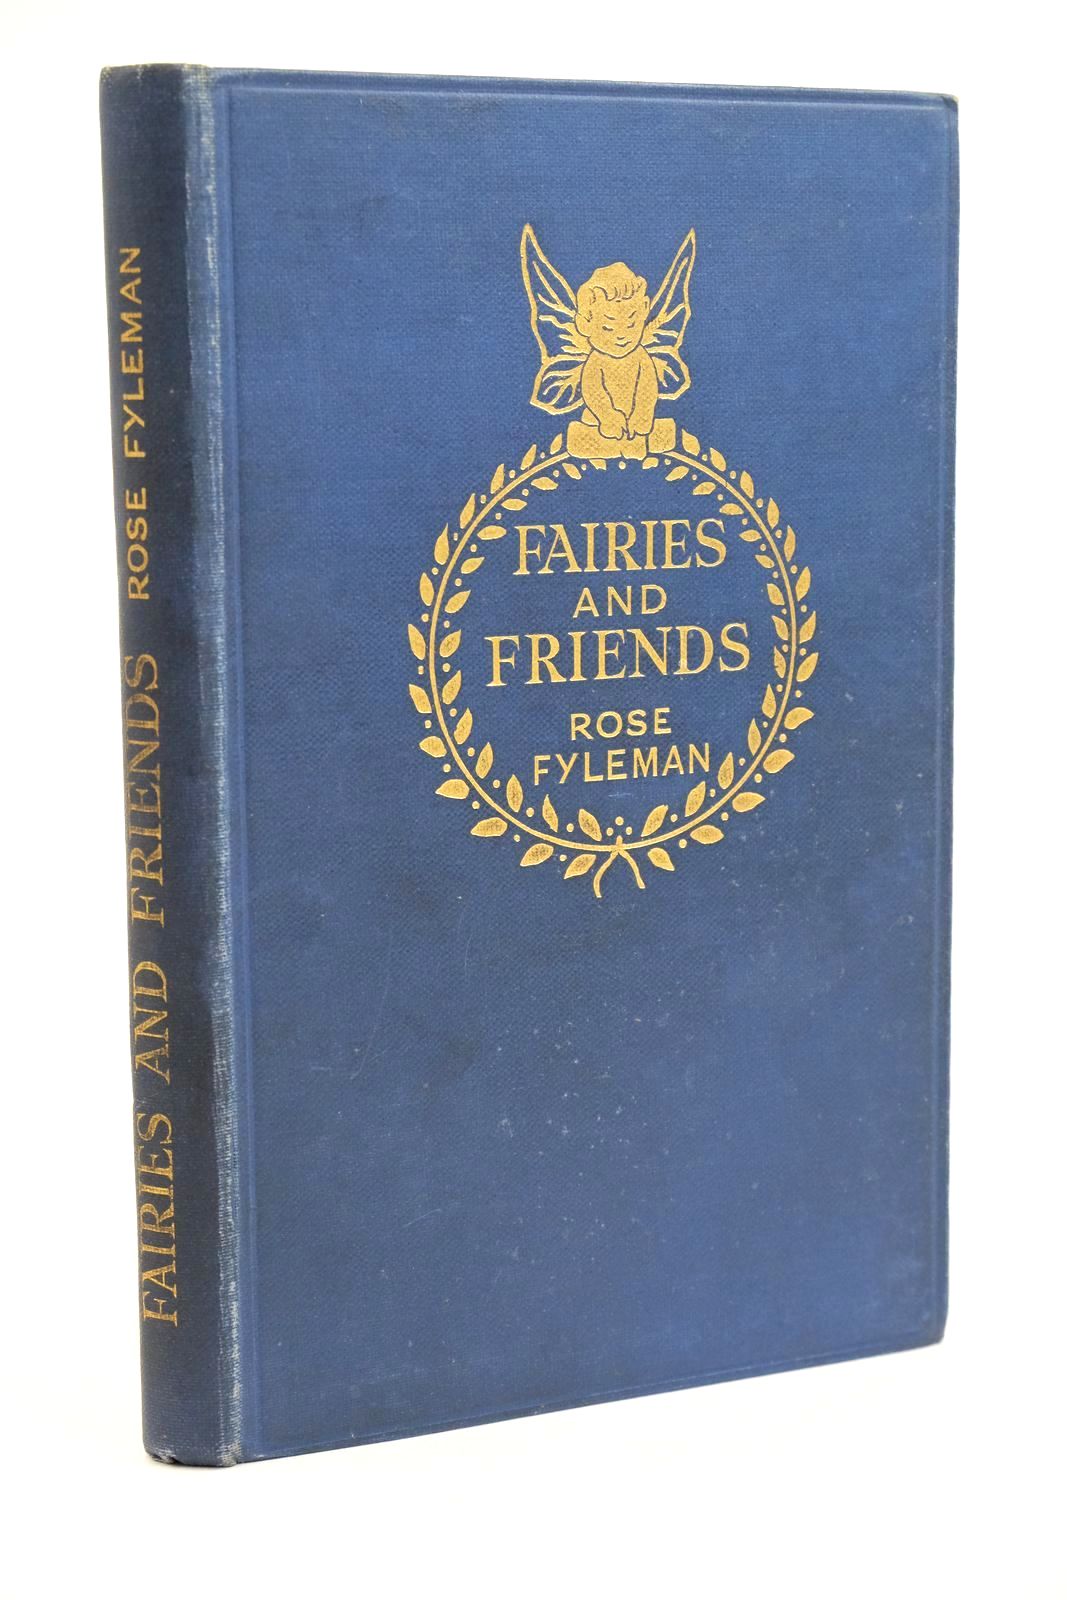 Photo of FAIRIES AND FRIENDS- Stock Number: 1323233